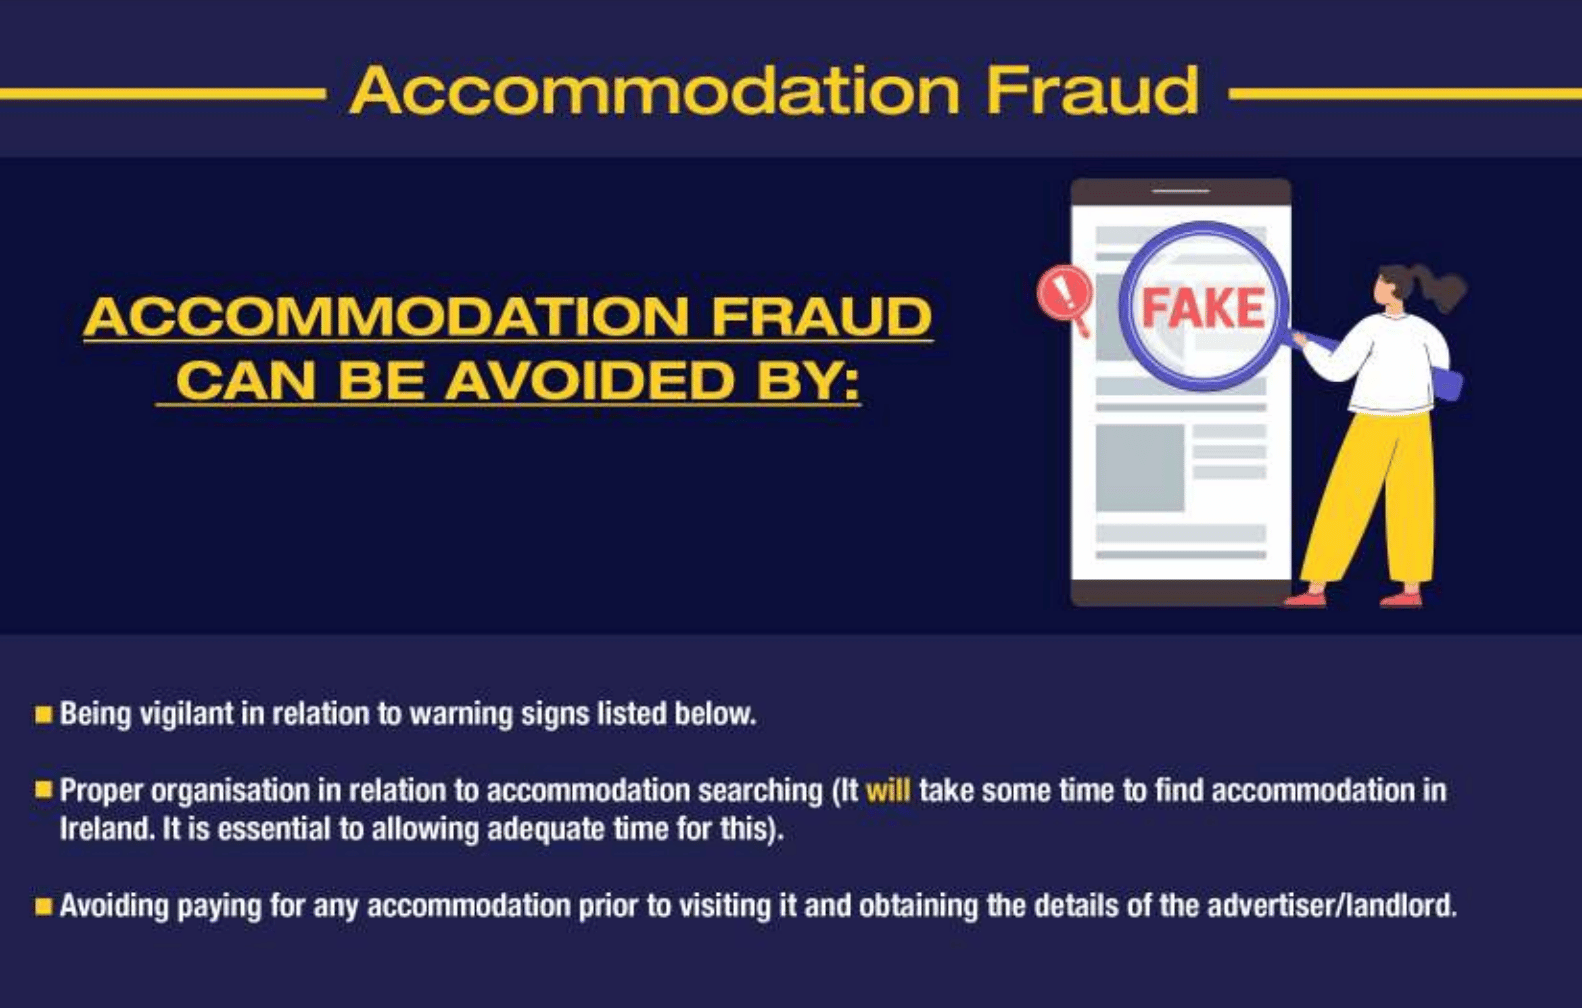 How to avoid accommodation fraud in Ireland